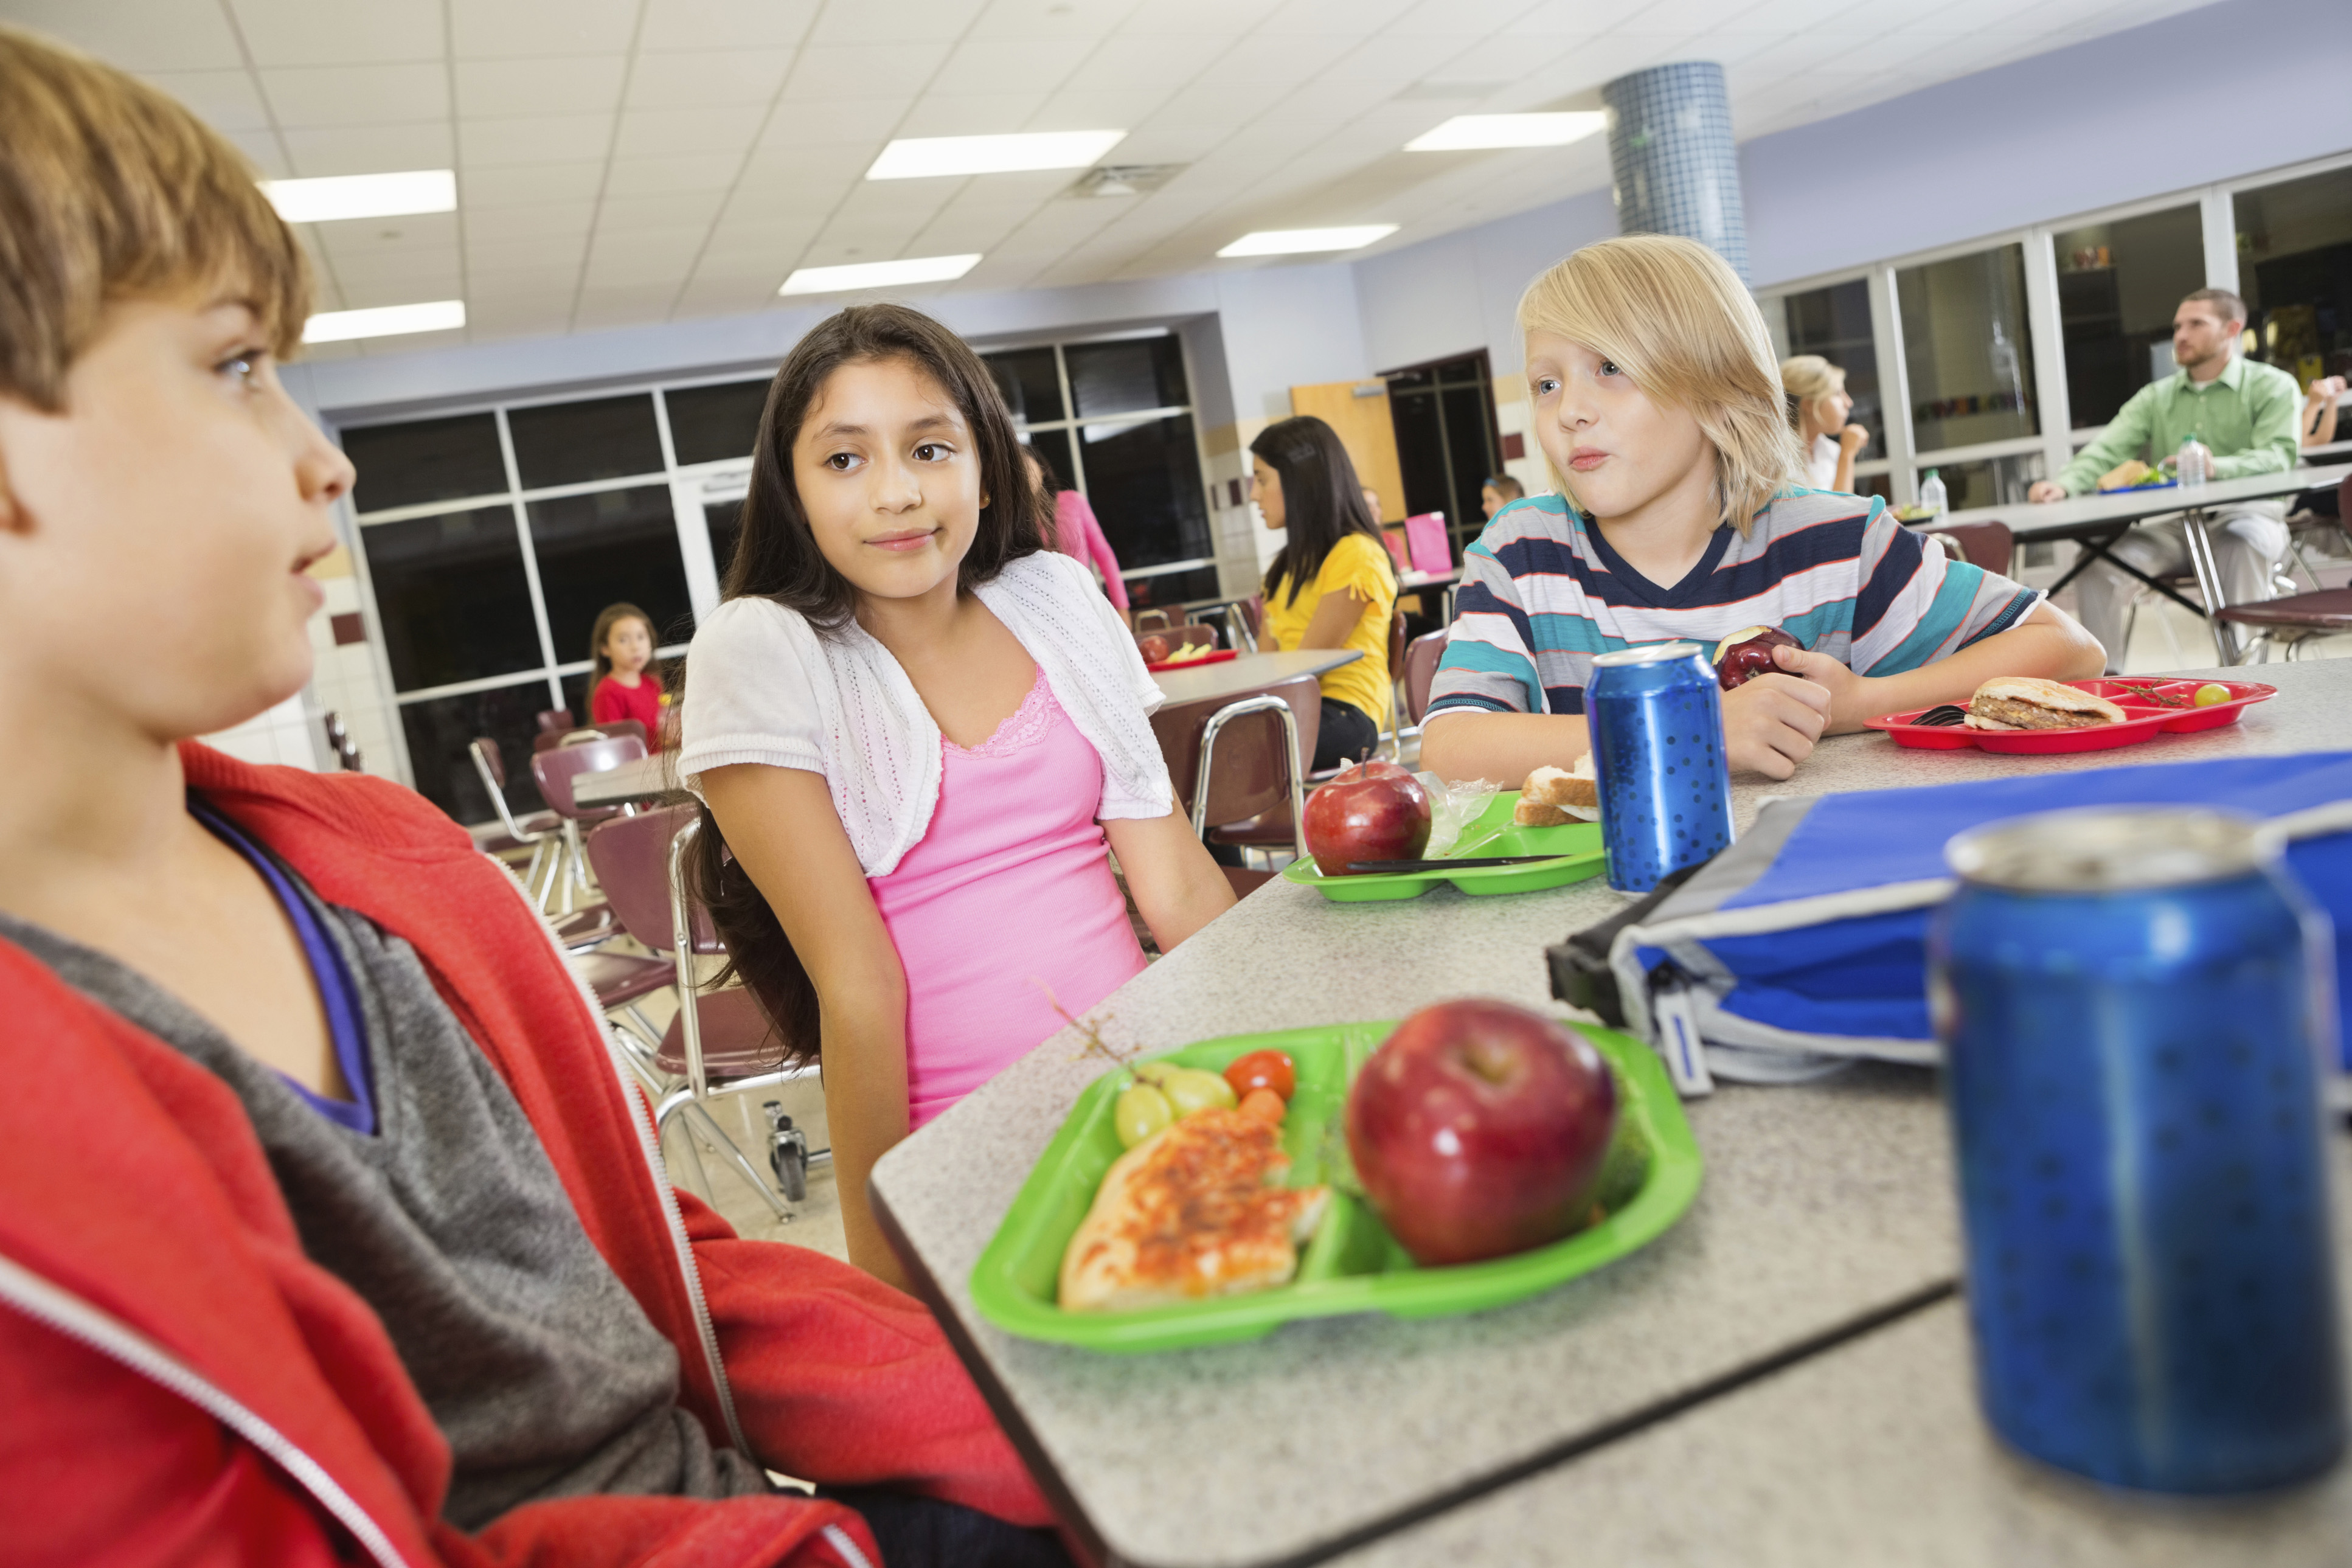 FAPC Center at Oklahoma State University Offers Parents Some Back-to-School Tips on Food Safety